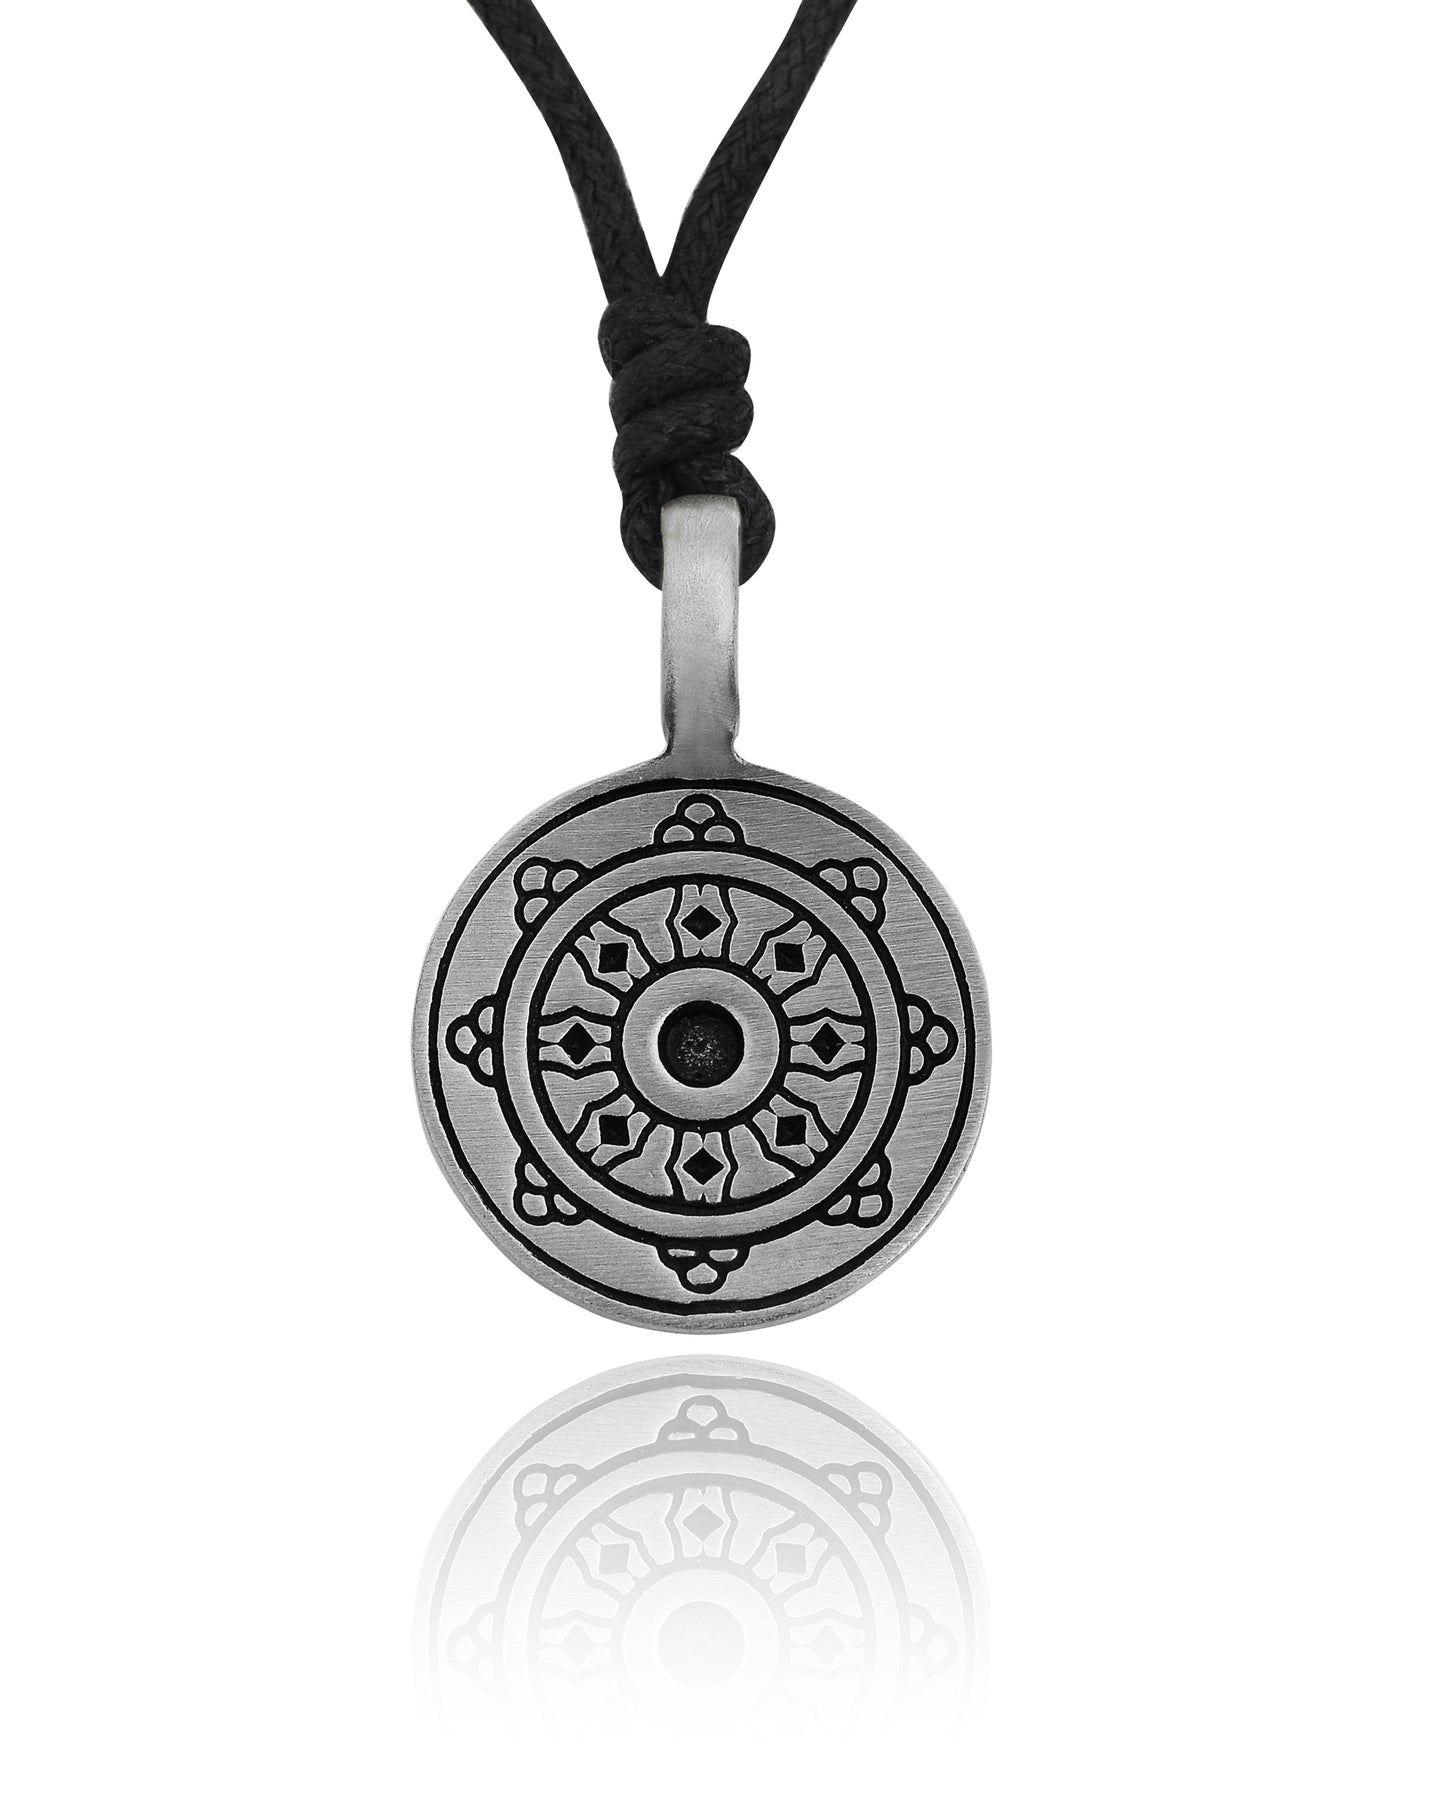 Norwegian Viking Shield Silver Pewter Charm Necklace Pendant Jewelry